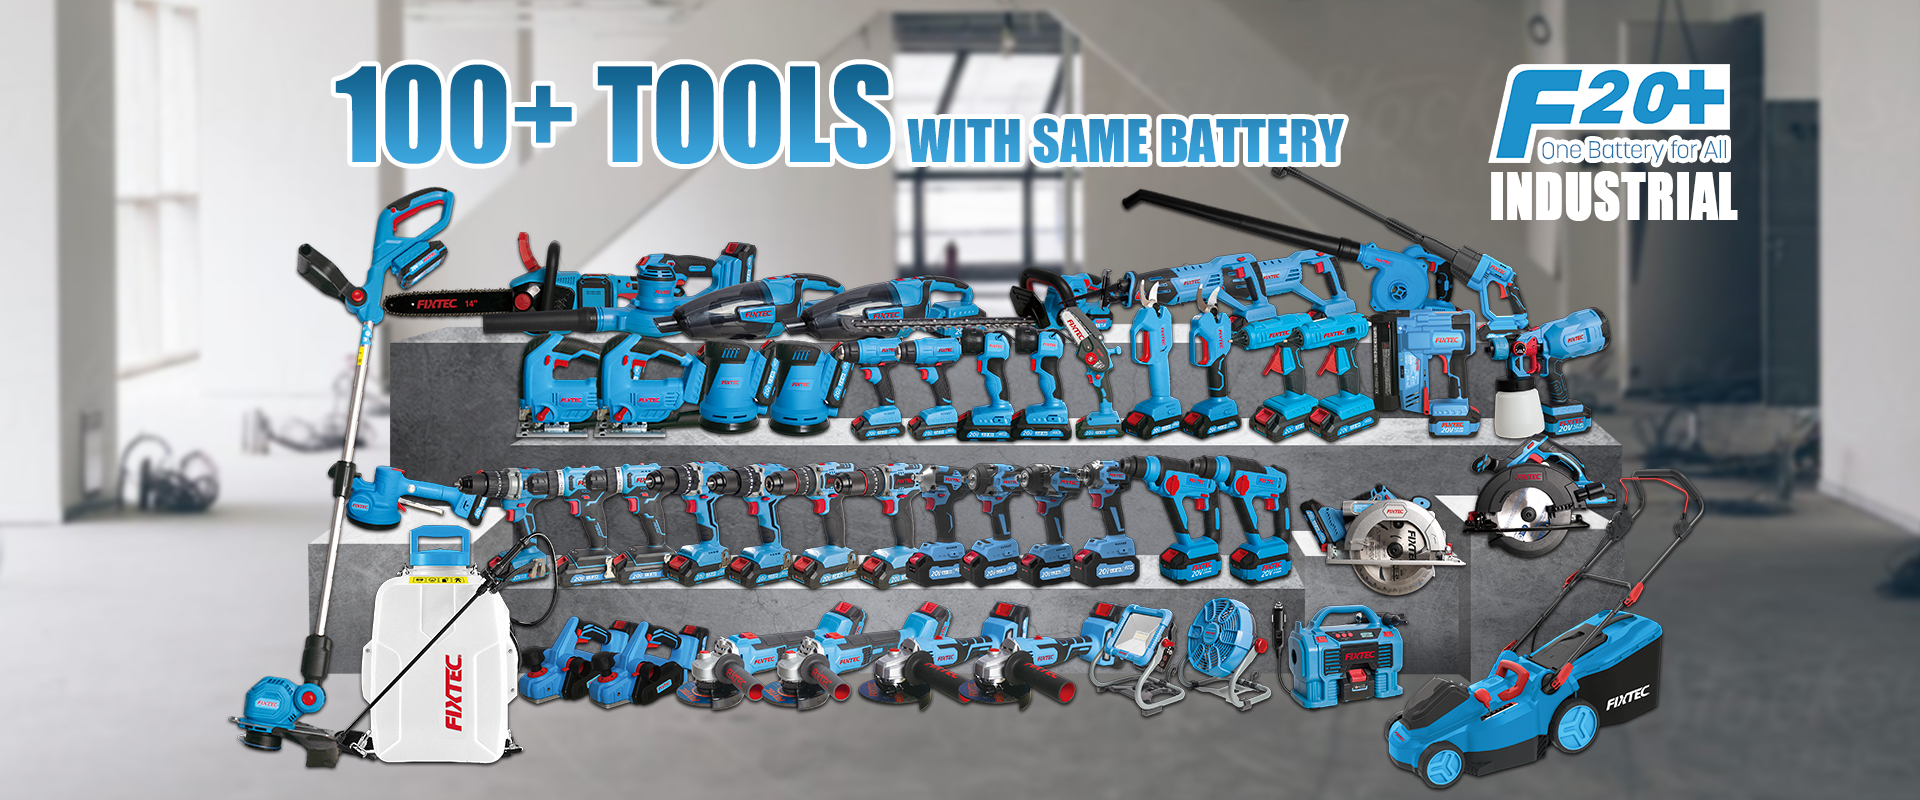 100+ Power tools with same battery 